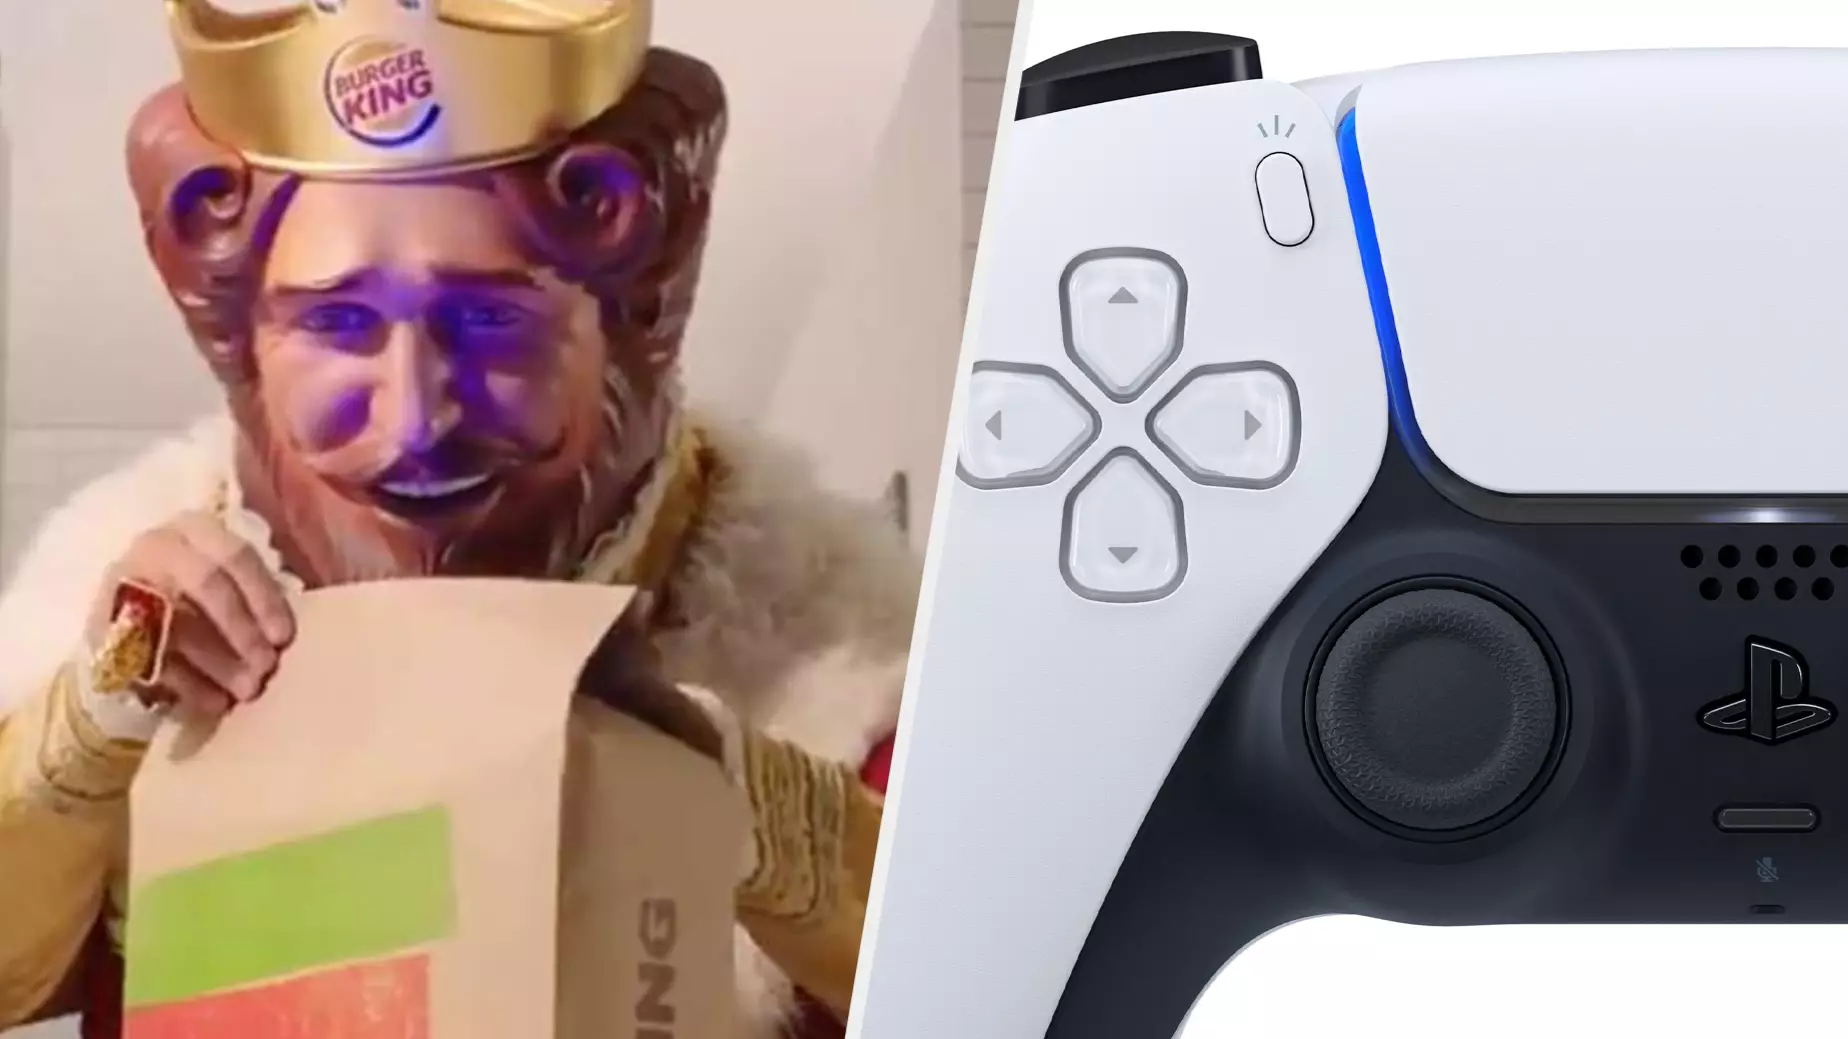 Burger King Just Teased Some Major PlayStation 5 News, For Some Reason